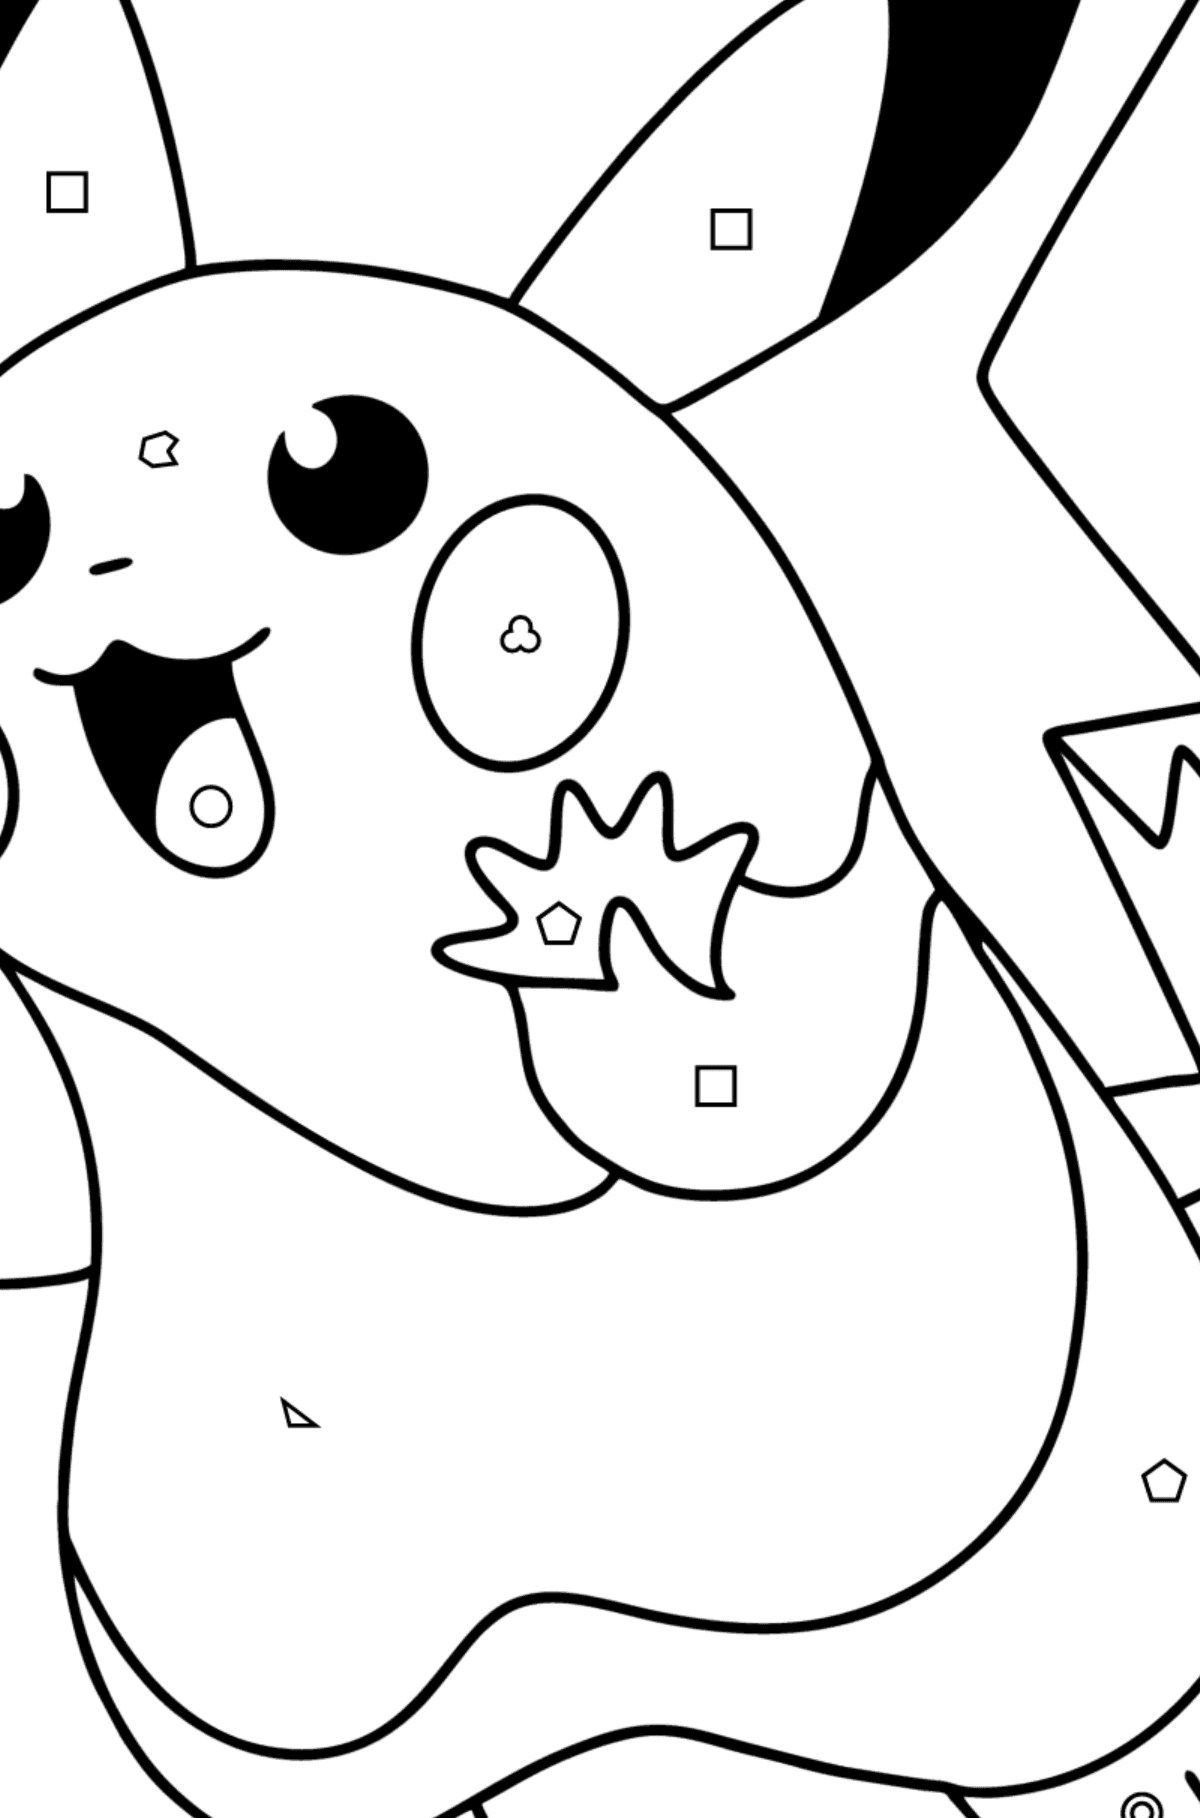 Coloring page Pokémon Go Picachu - Coloring by Geometric Shapes for Kids